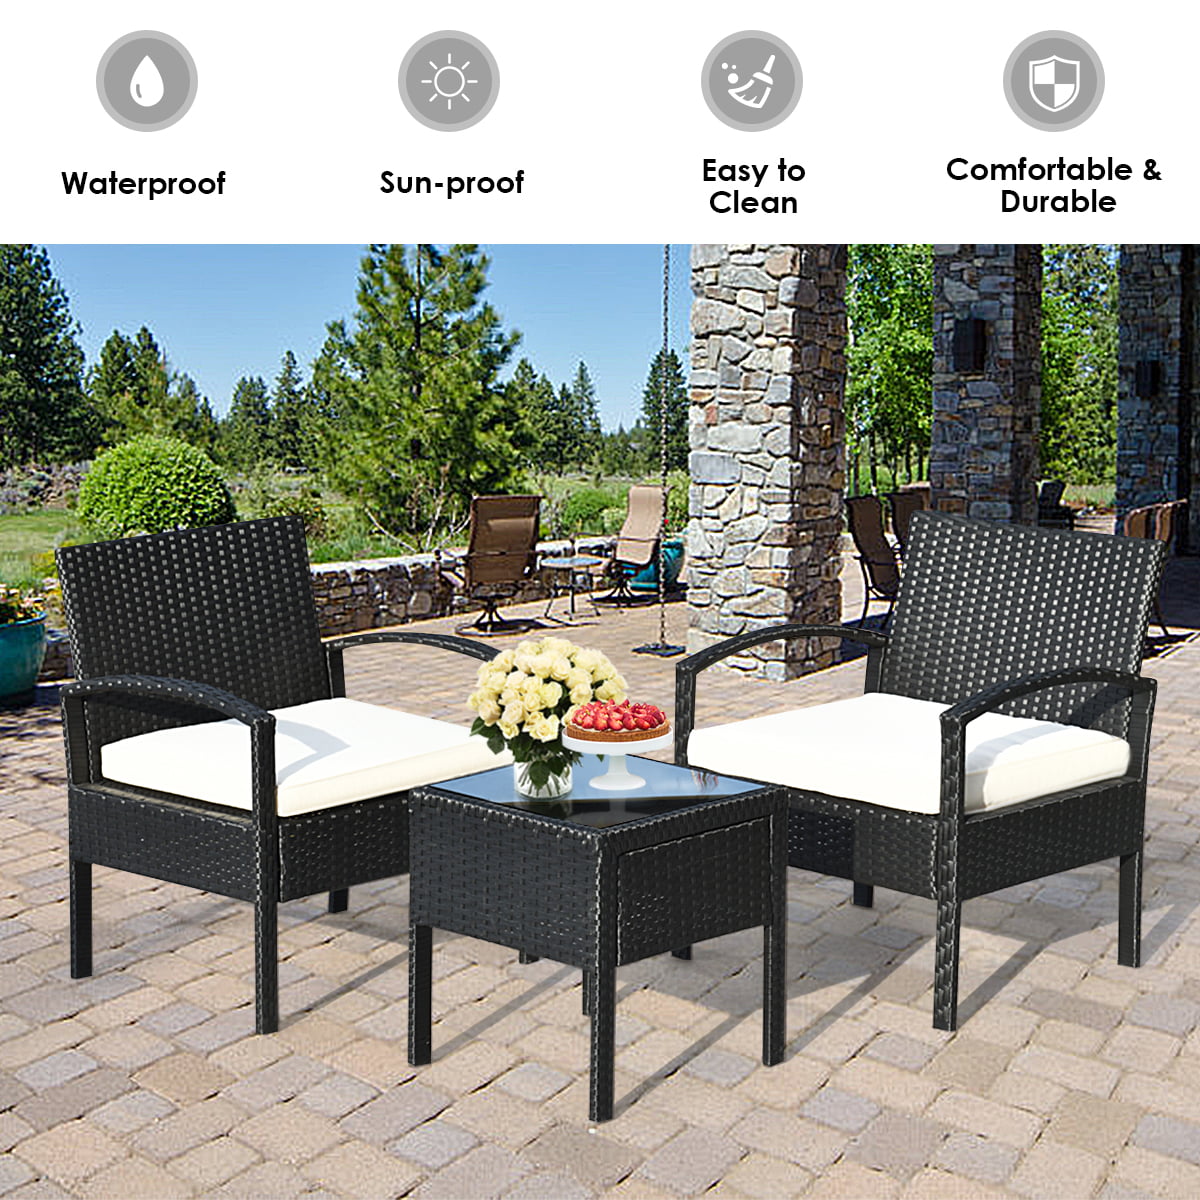 Costway 3PCS Patio Rattan Furniture Set Table & Chairs Set with Seat